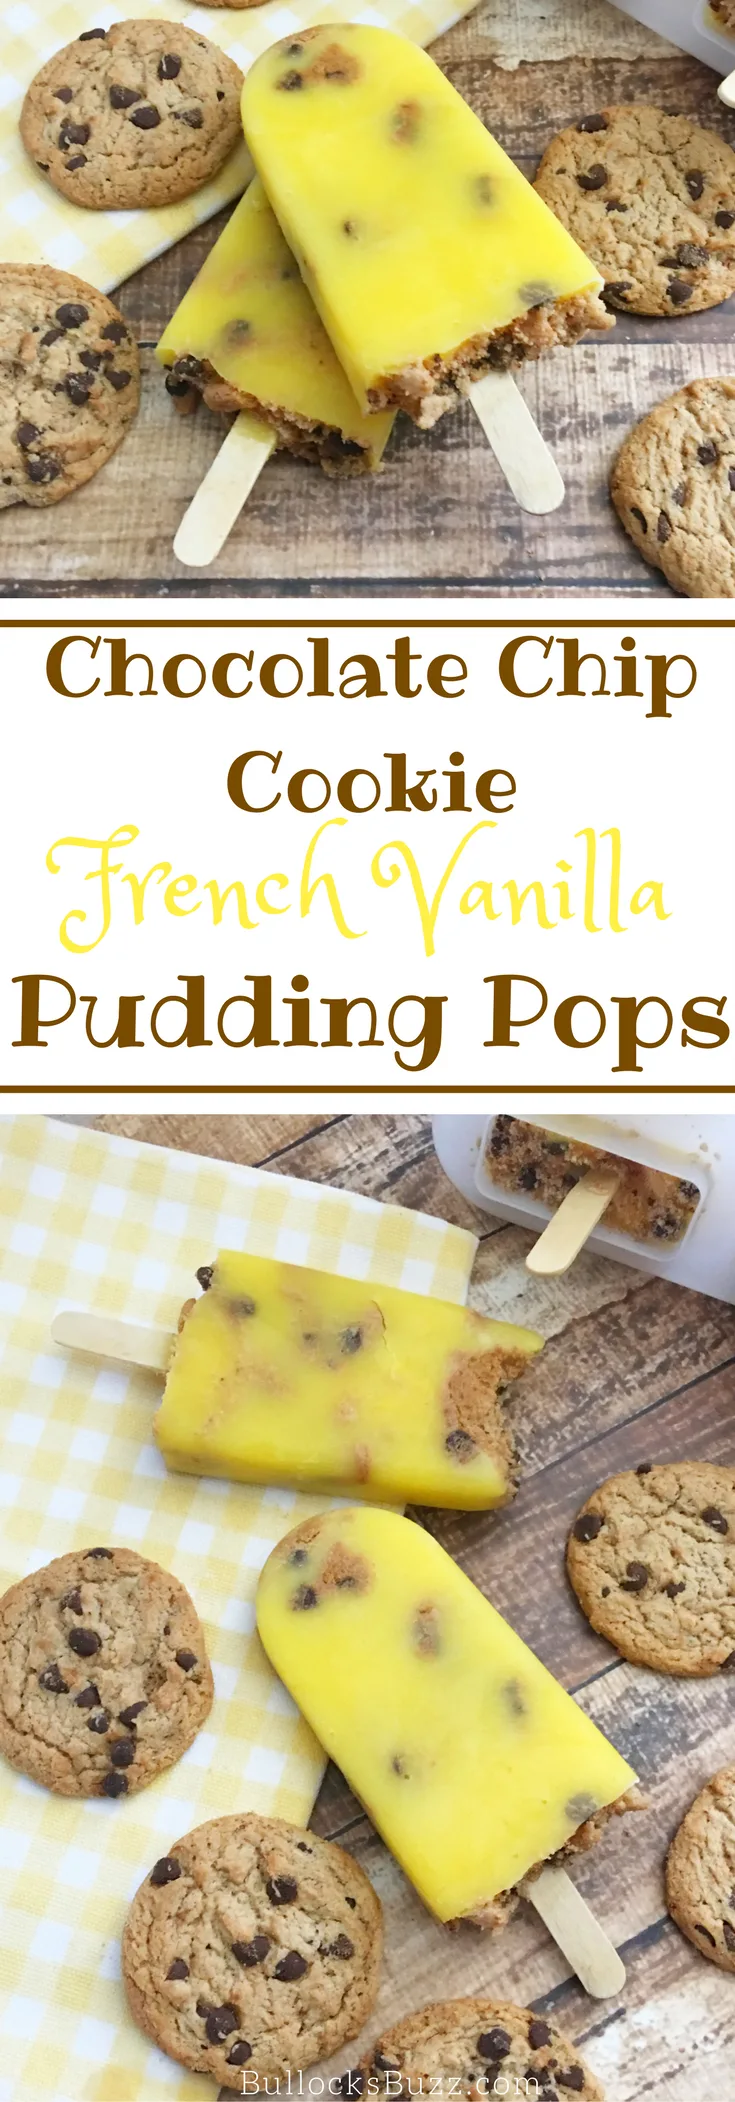 These cool, creamy and sweet French Vanilla Pudding Pops with Chocolate Chip Cookie crumbles are the perfect warm weather treat!